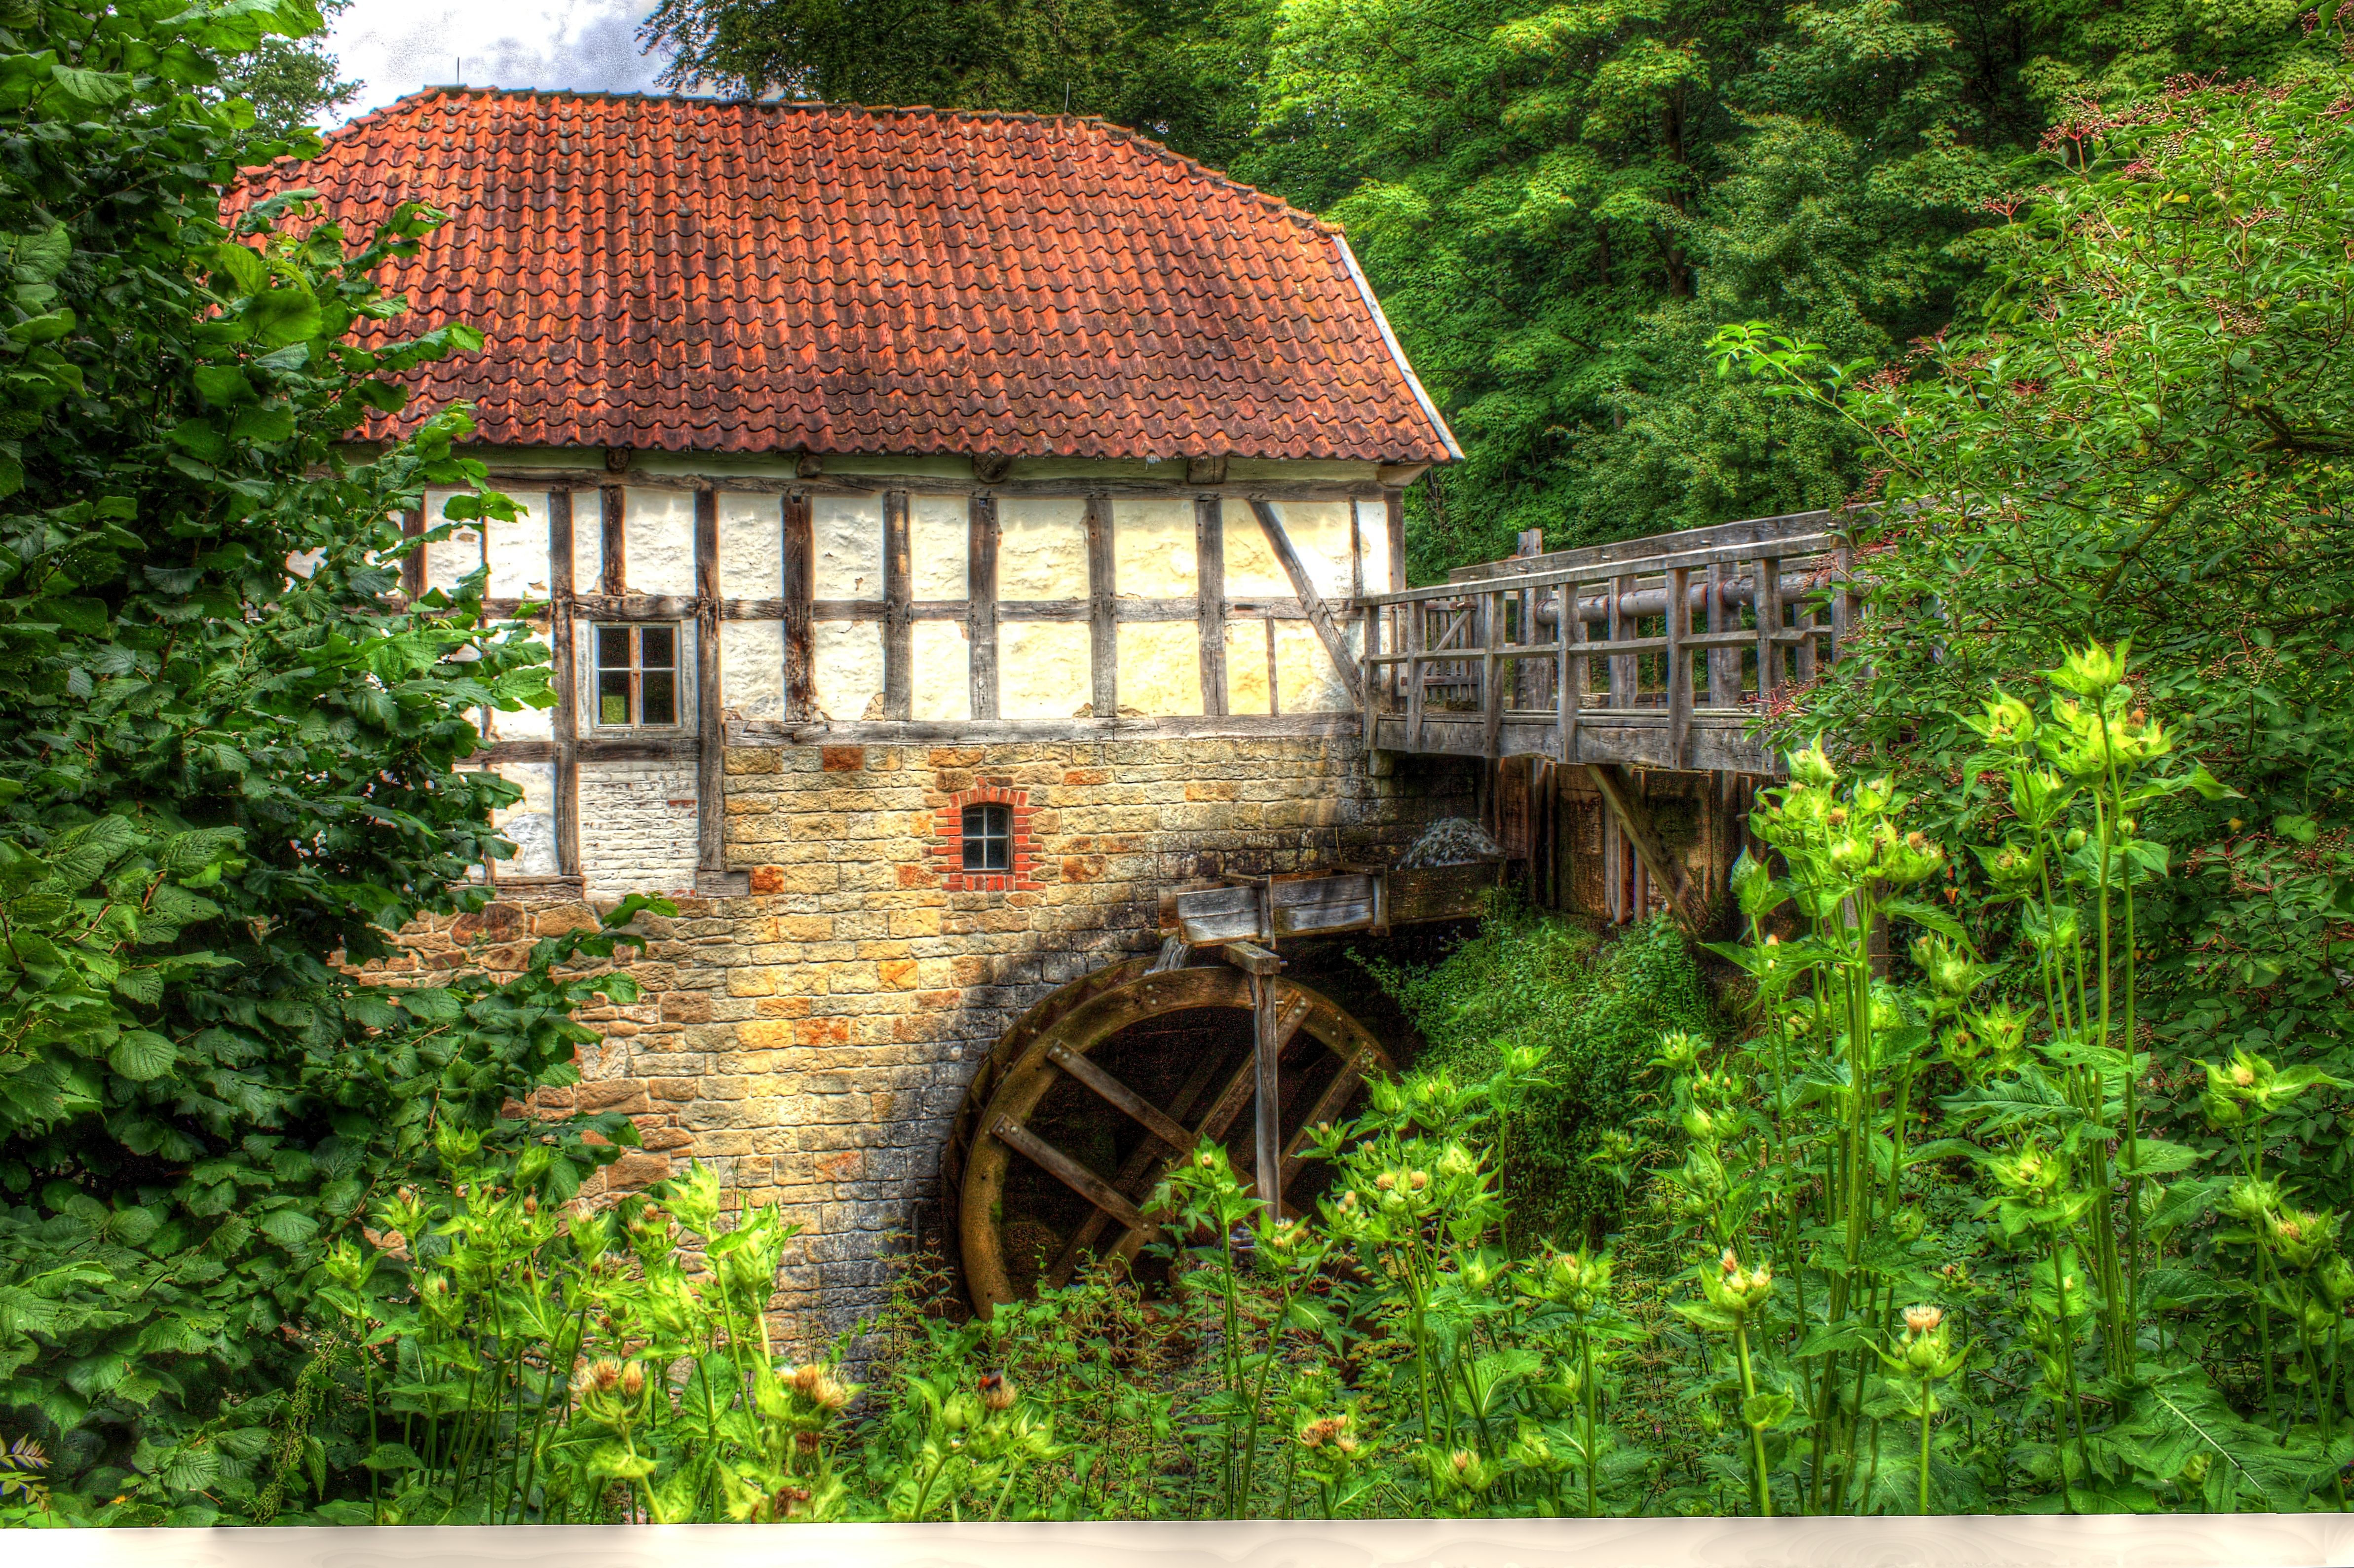 Hdr Watermill 4770x3178